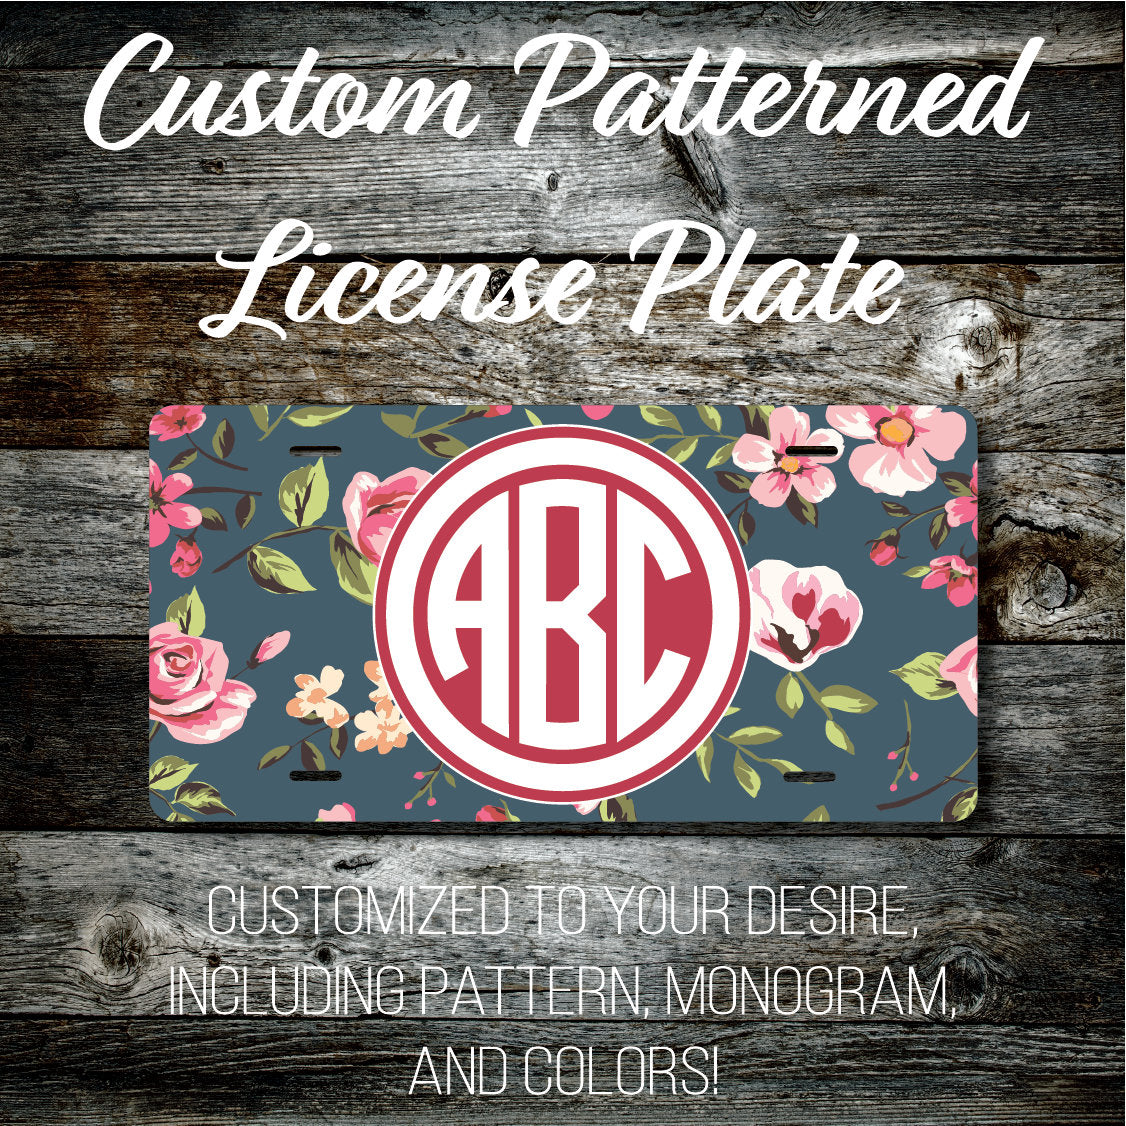 Personalized Monogrammed Custom License Plate (Pattern #272), Car Tag, Vanity license plate, Floral & Stripes Watercolor